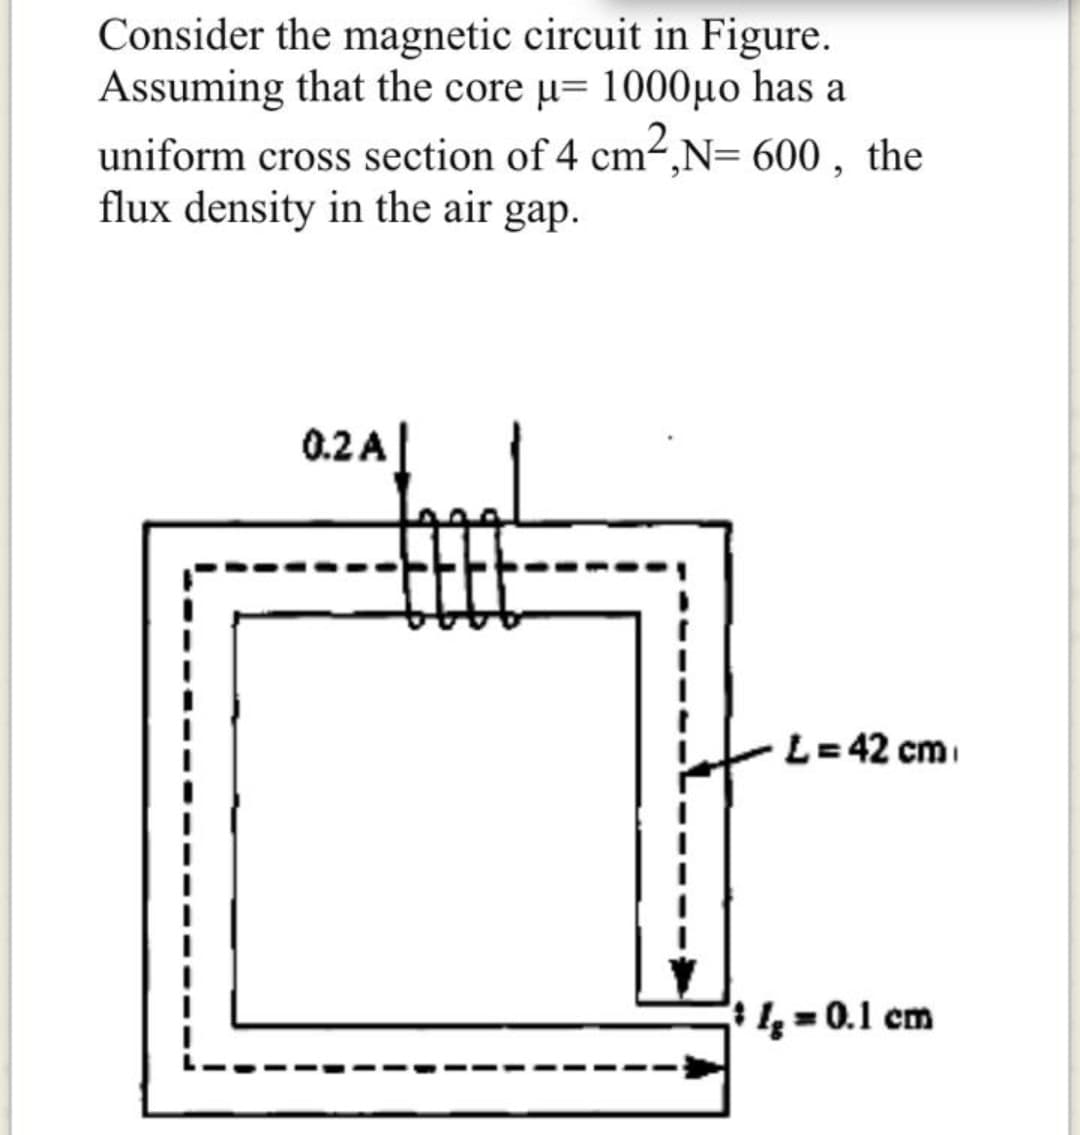 Consider the magnetic circuit in Figure.
Assuming that the core µ= 1000µo has a
uniform cross section of 4 cm2,N= 600 , the
flux density in the air gap.
0.2 A
L=42 cm
4 = 0.1 cm
